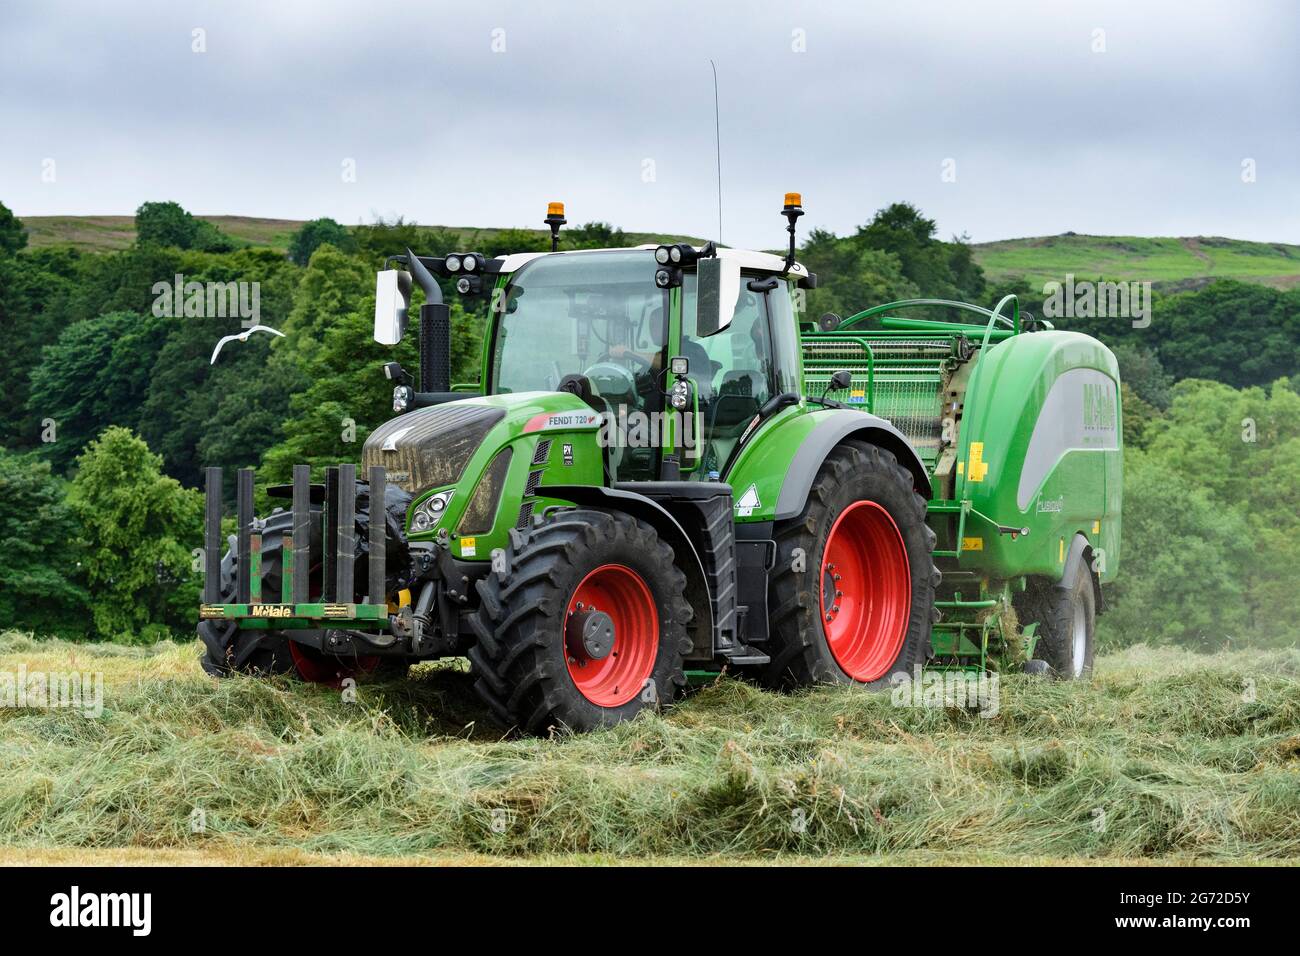 Hay & silage making (farmer in cab driving green farm tractor at work in field, pulling McHale baler, collecting cut dry grass) - Yorkshire England UK Stock Photo